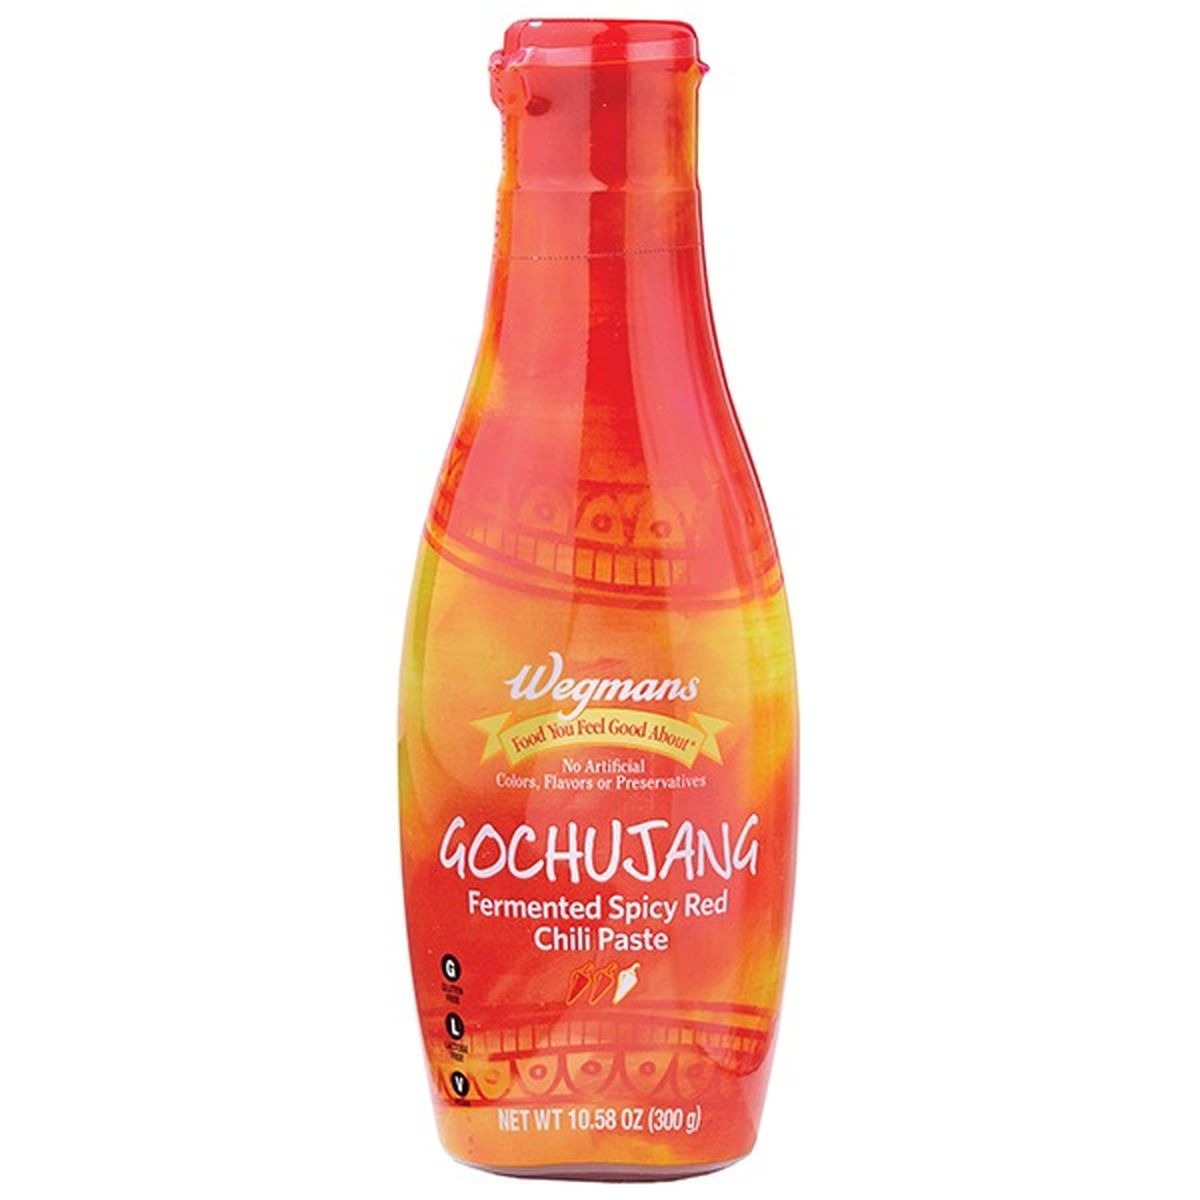 Calories in Wegmans Gochujang Fermented Spicy Red Chili Paste